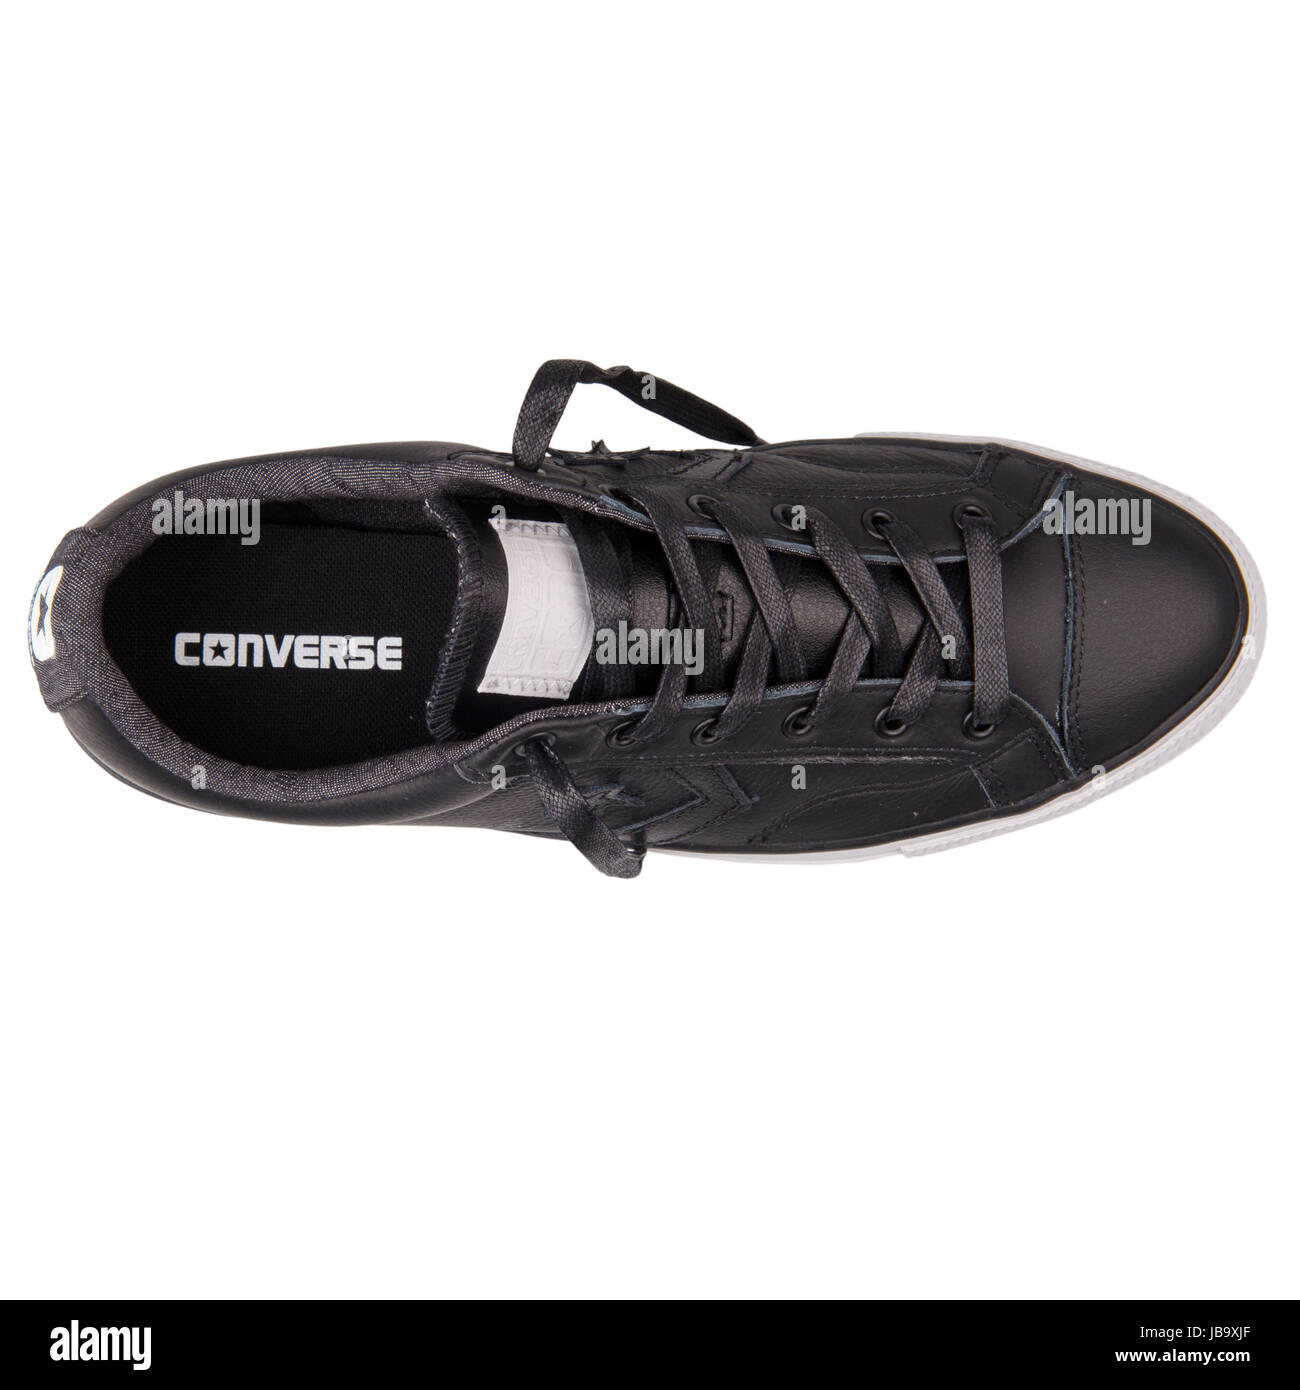 Converse Chuck Taylor All Star Player OX Black Leather Unisex Shoes -  149765C Stock Photo - Alamy